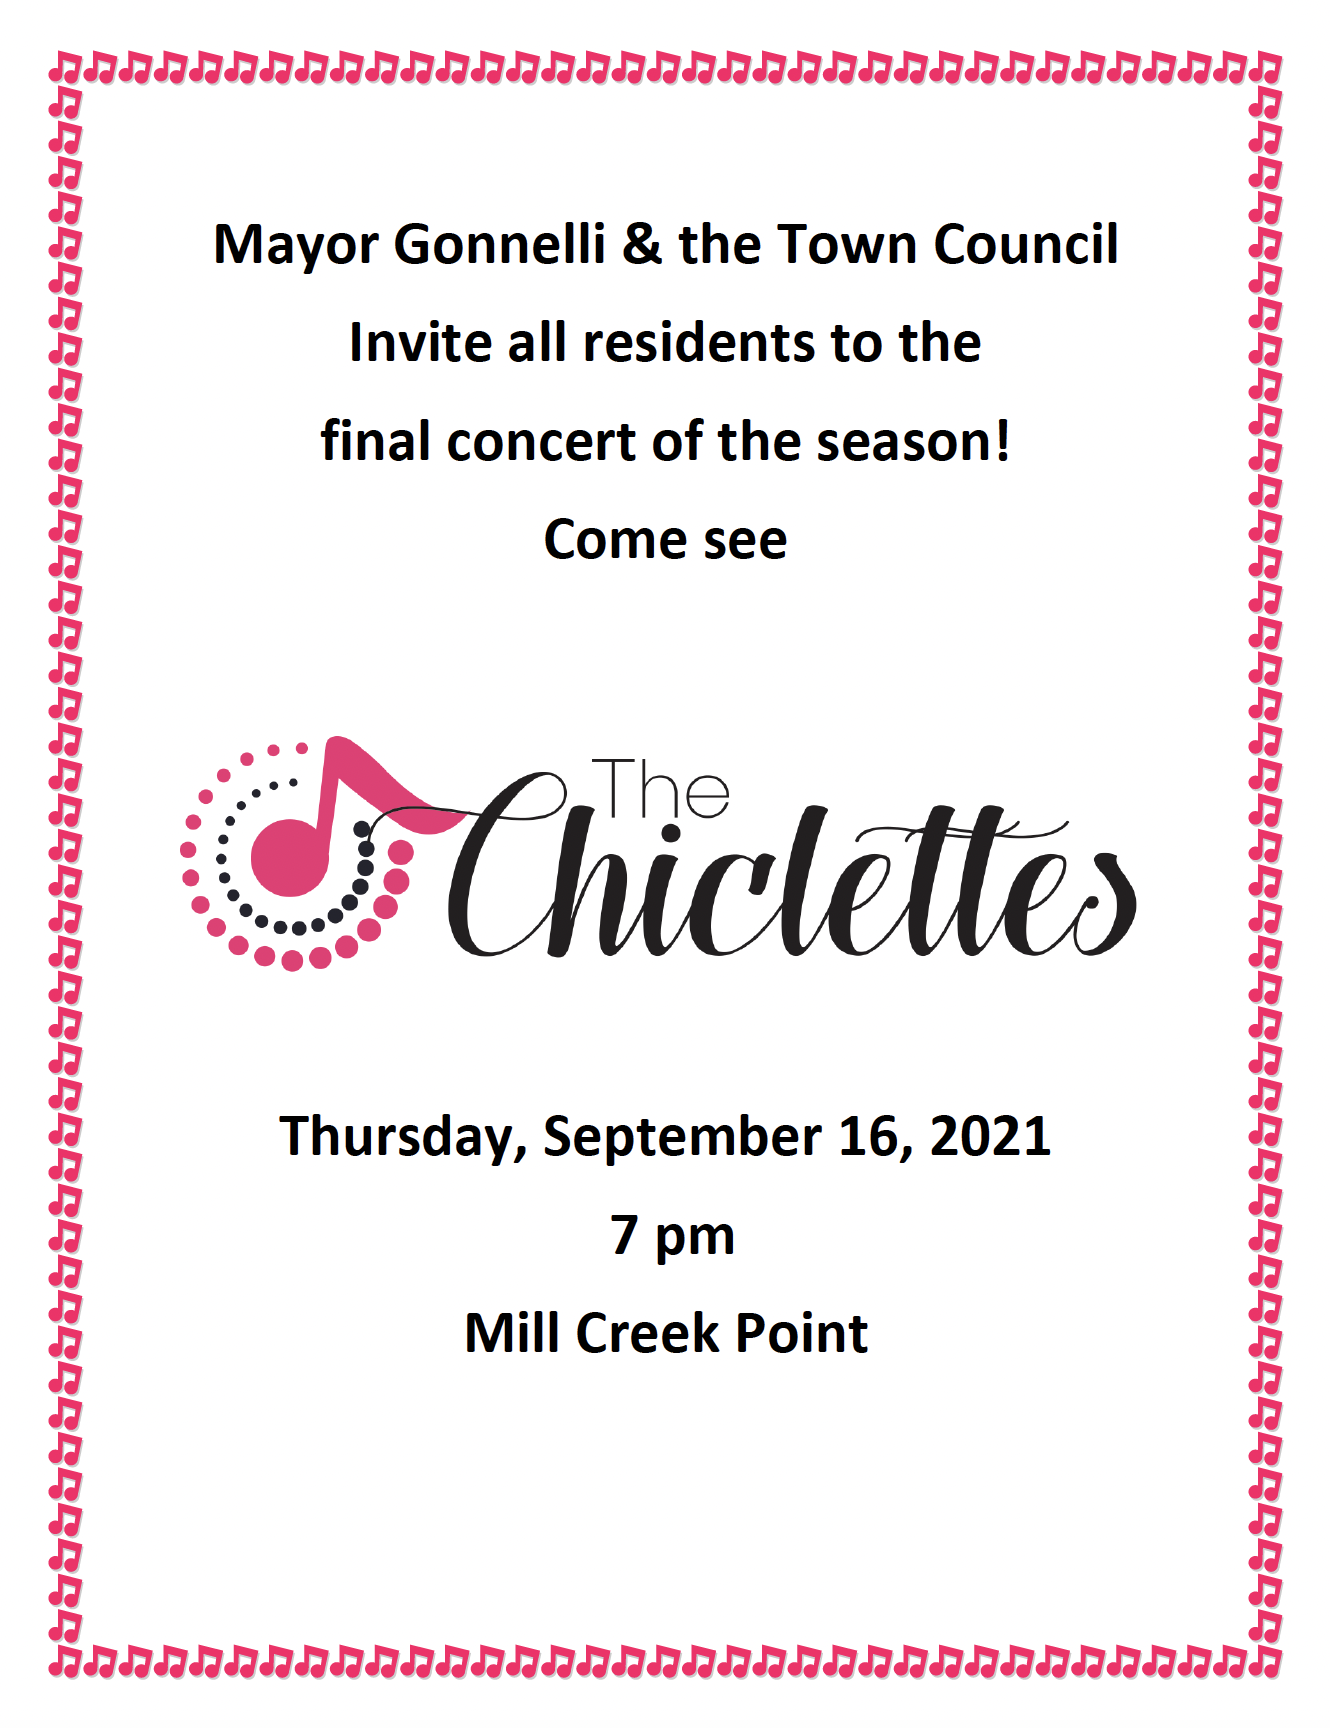 The Chiclettes Concert Flyer